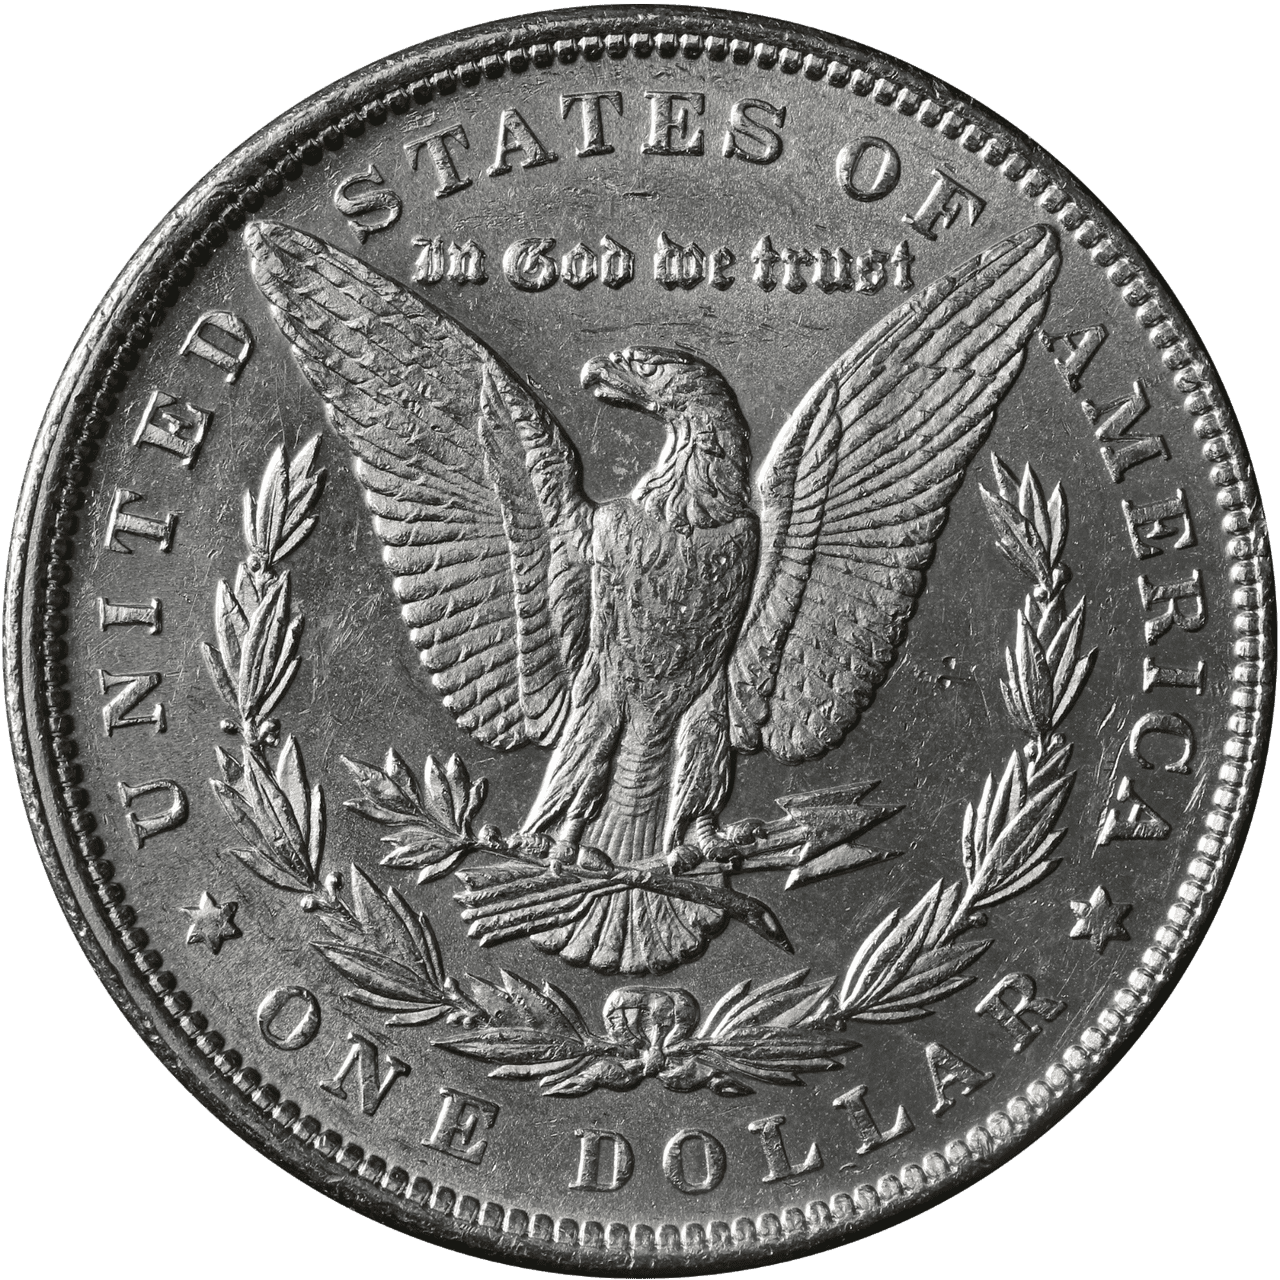 The Reverse of the 1892 Silver Dollar